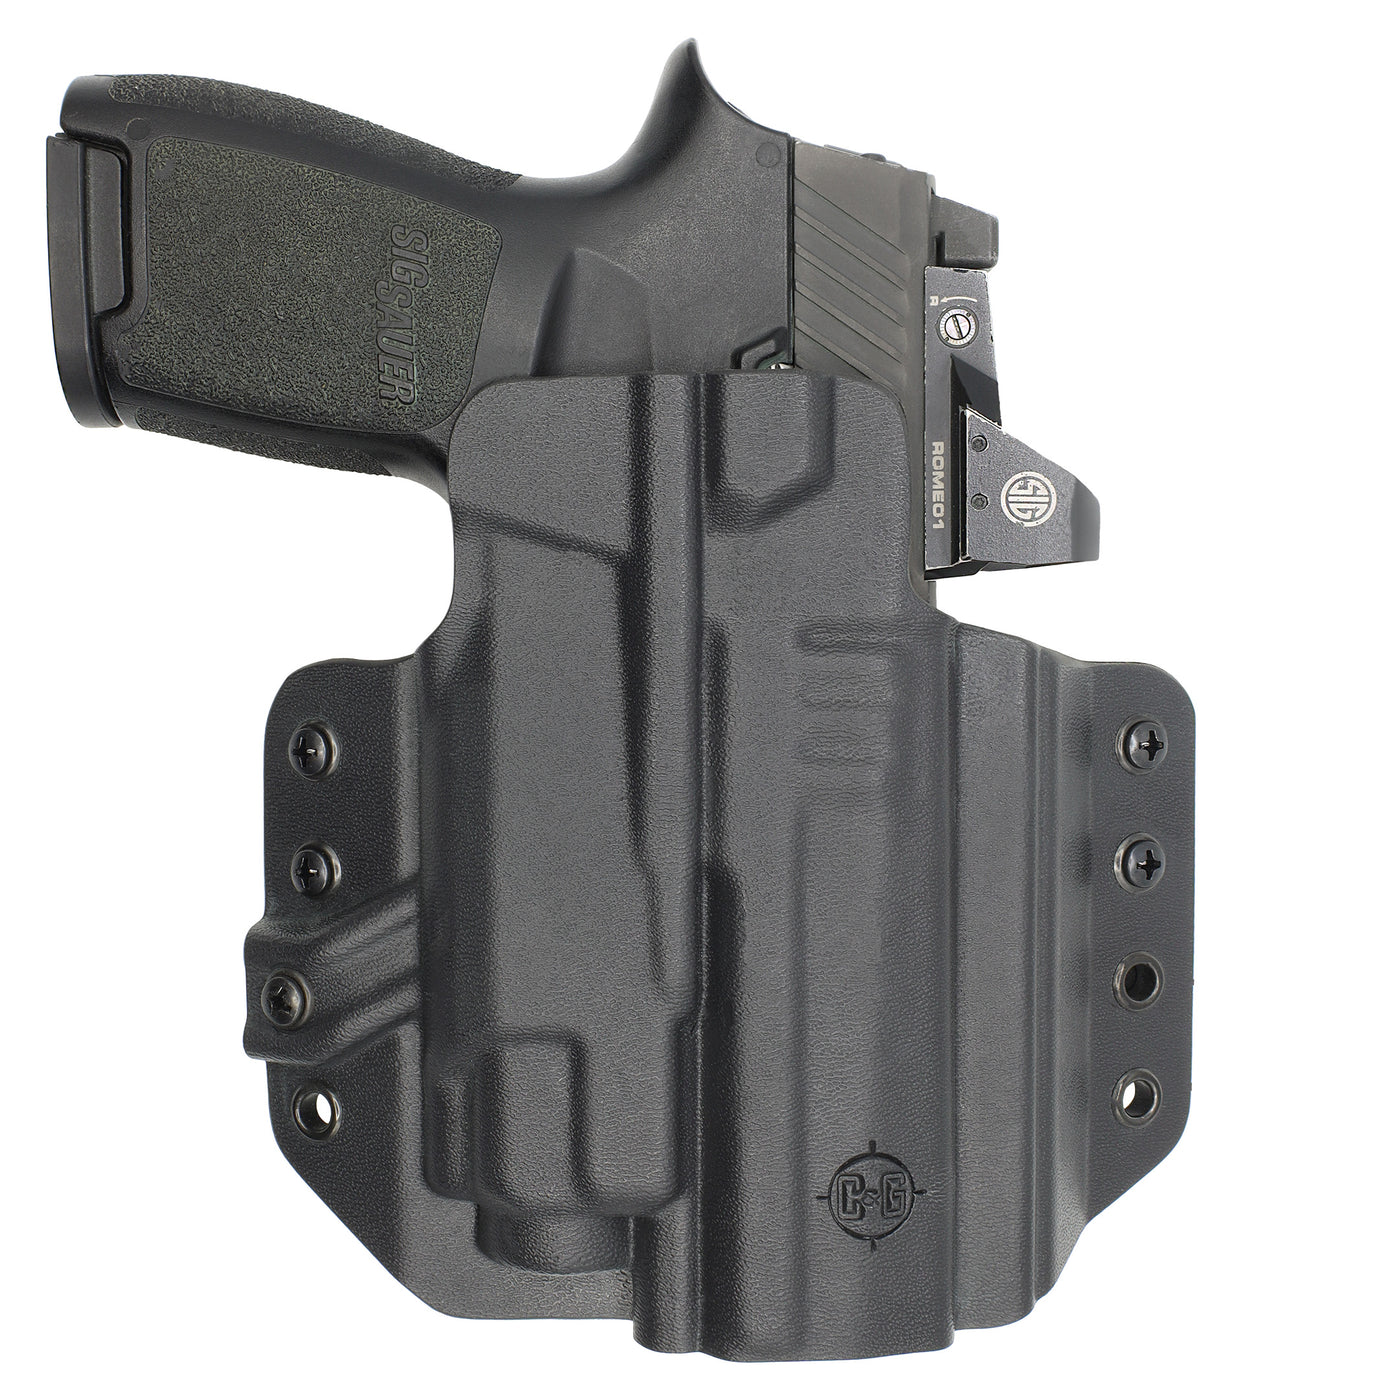 C&G Holsters custom OWB Tactical IWI Masada streamlight TLR8 holstered